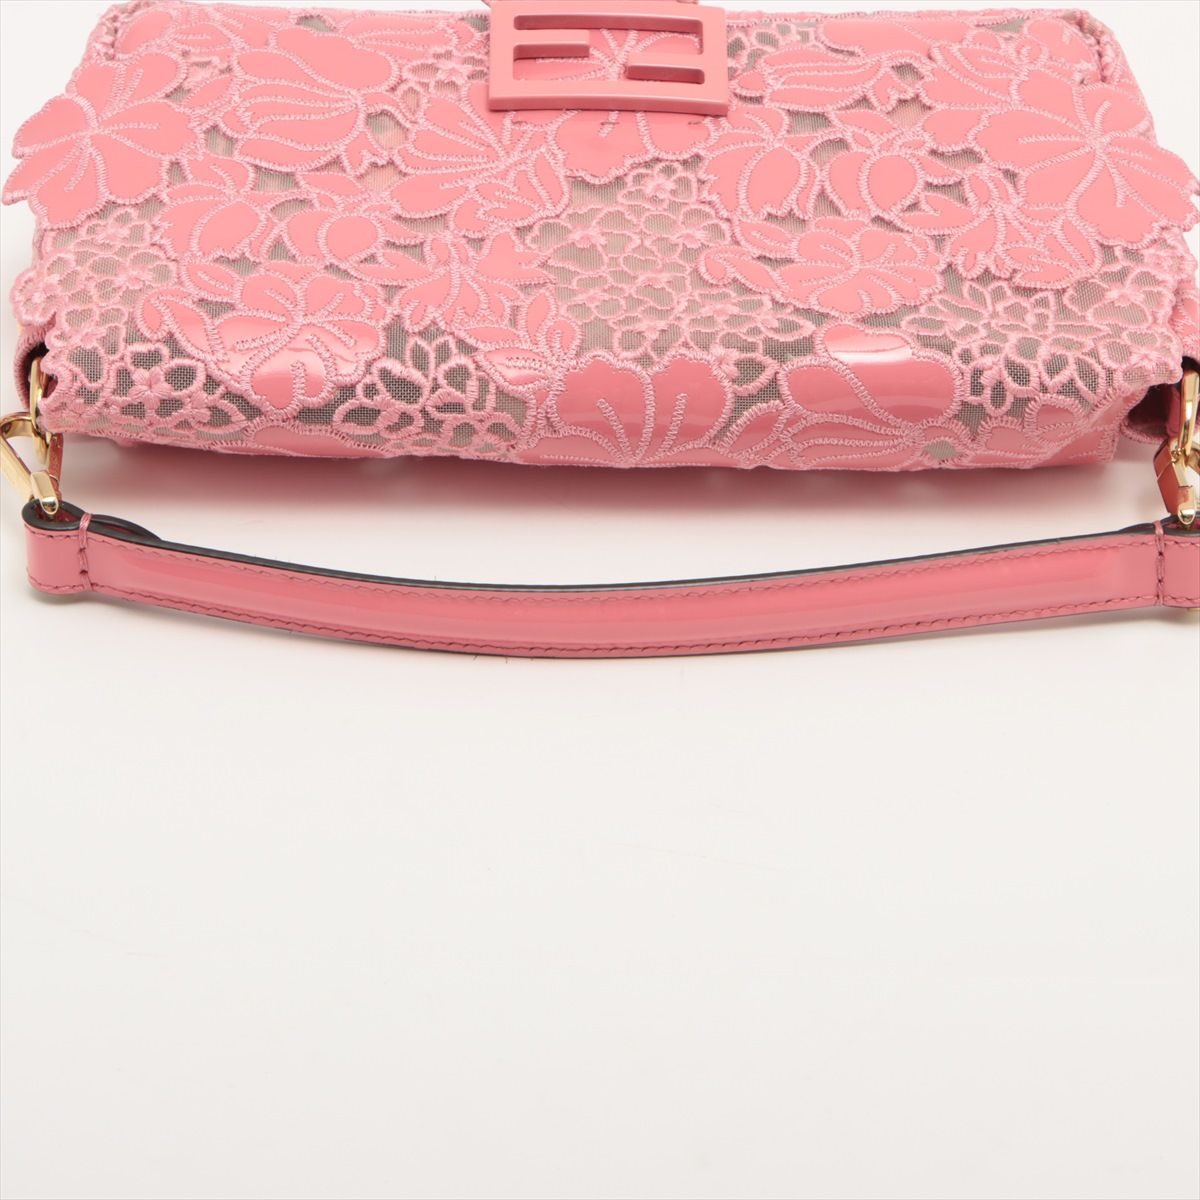 FENDI Fendi Baguette RARE SS21 Embroidered Lace Pink Patent Leather - Vault 55